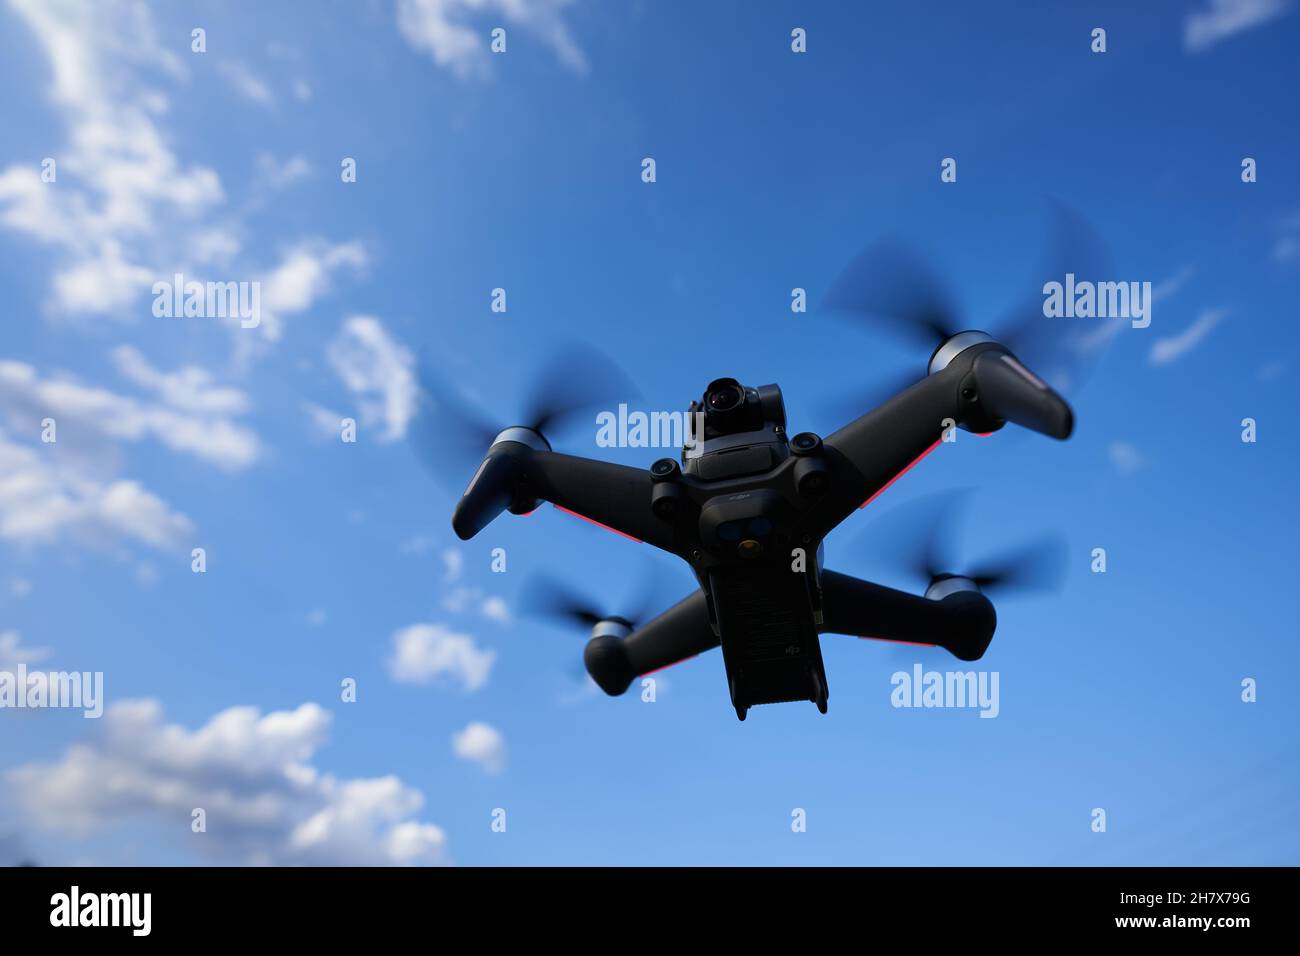 Nürtingen, Germany - June 26, 2021: Black dji fpv drone hovering in front of a blue sky. Racing drone with dark propellers and red lights. View Obliqu Stock Photo